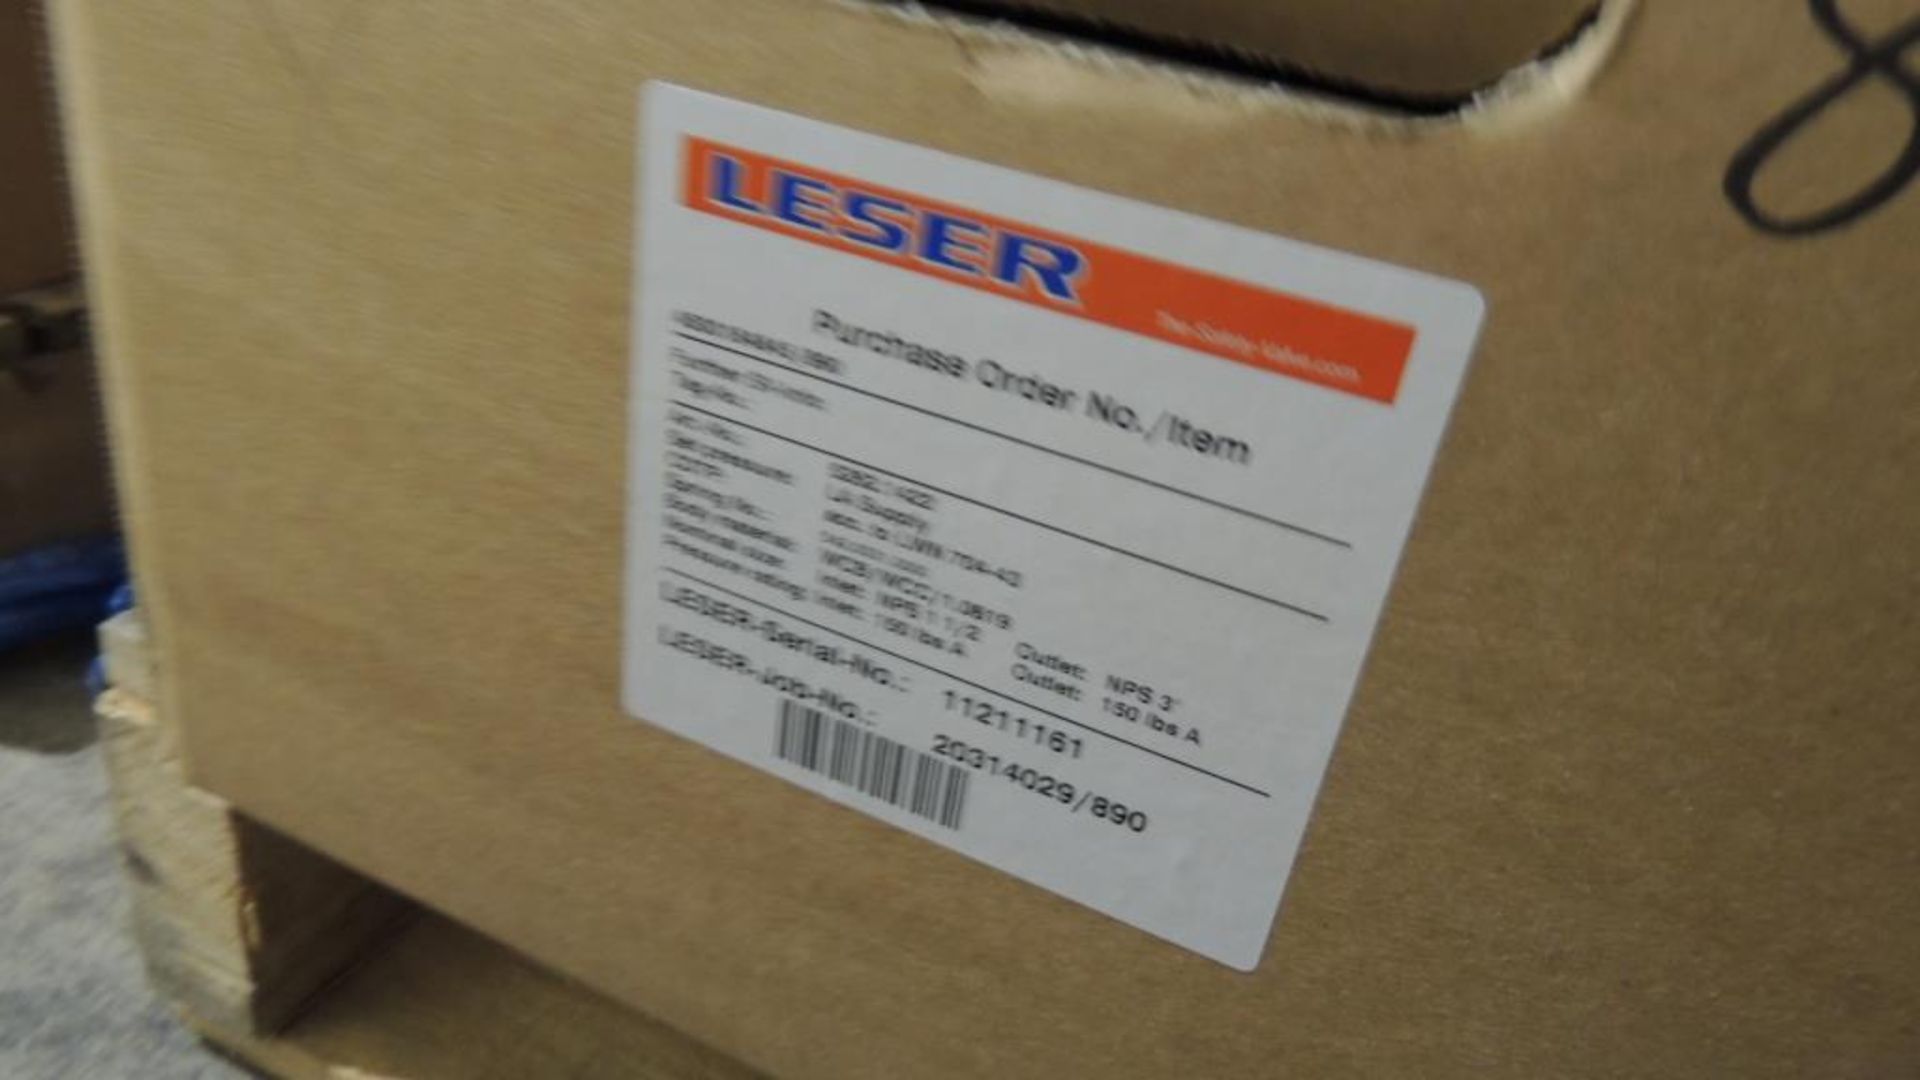 Large Quantity of Leser Relief and Safety Valves, plus Spare Parts Kits - Image 202 of 374